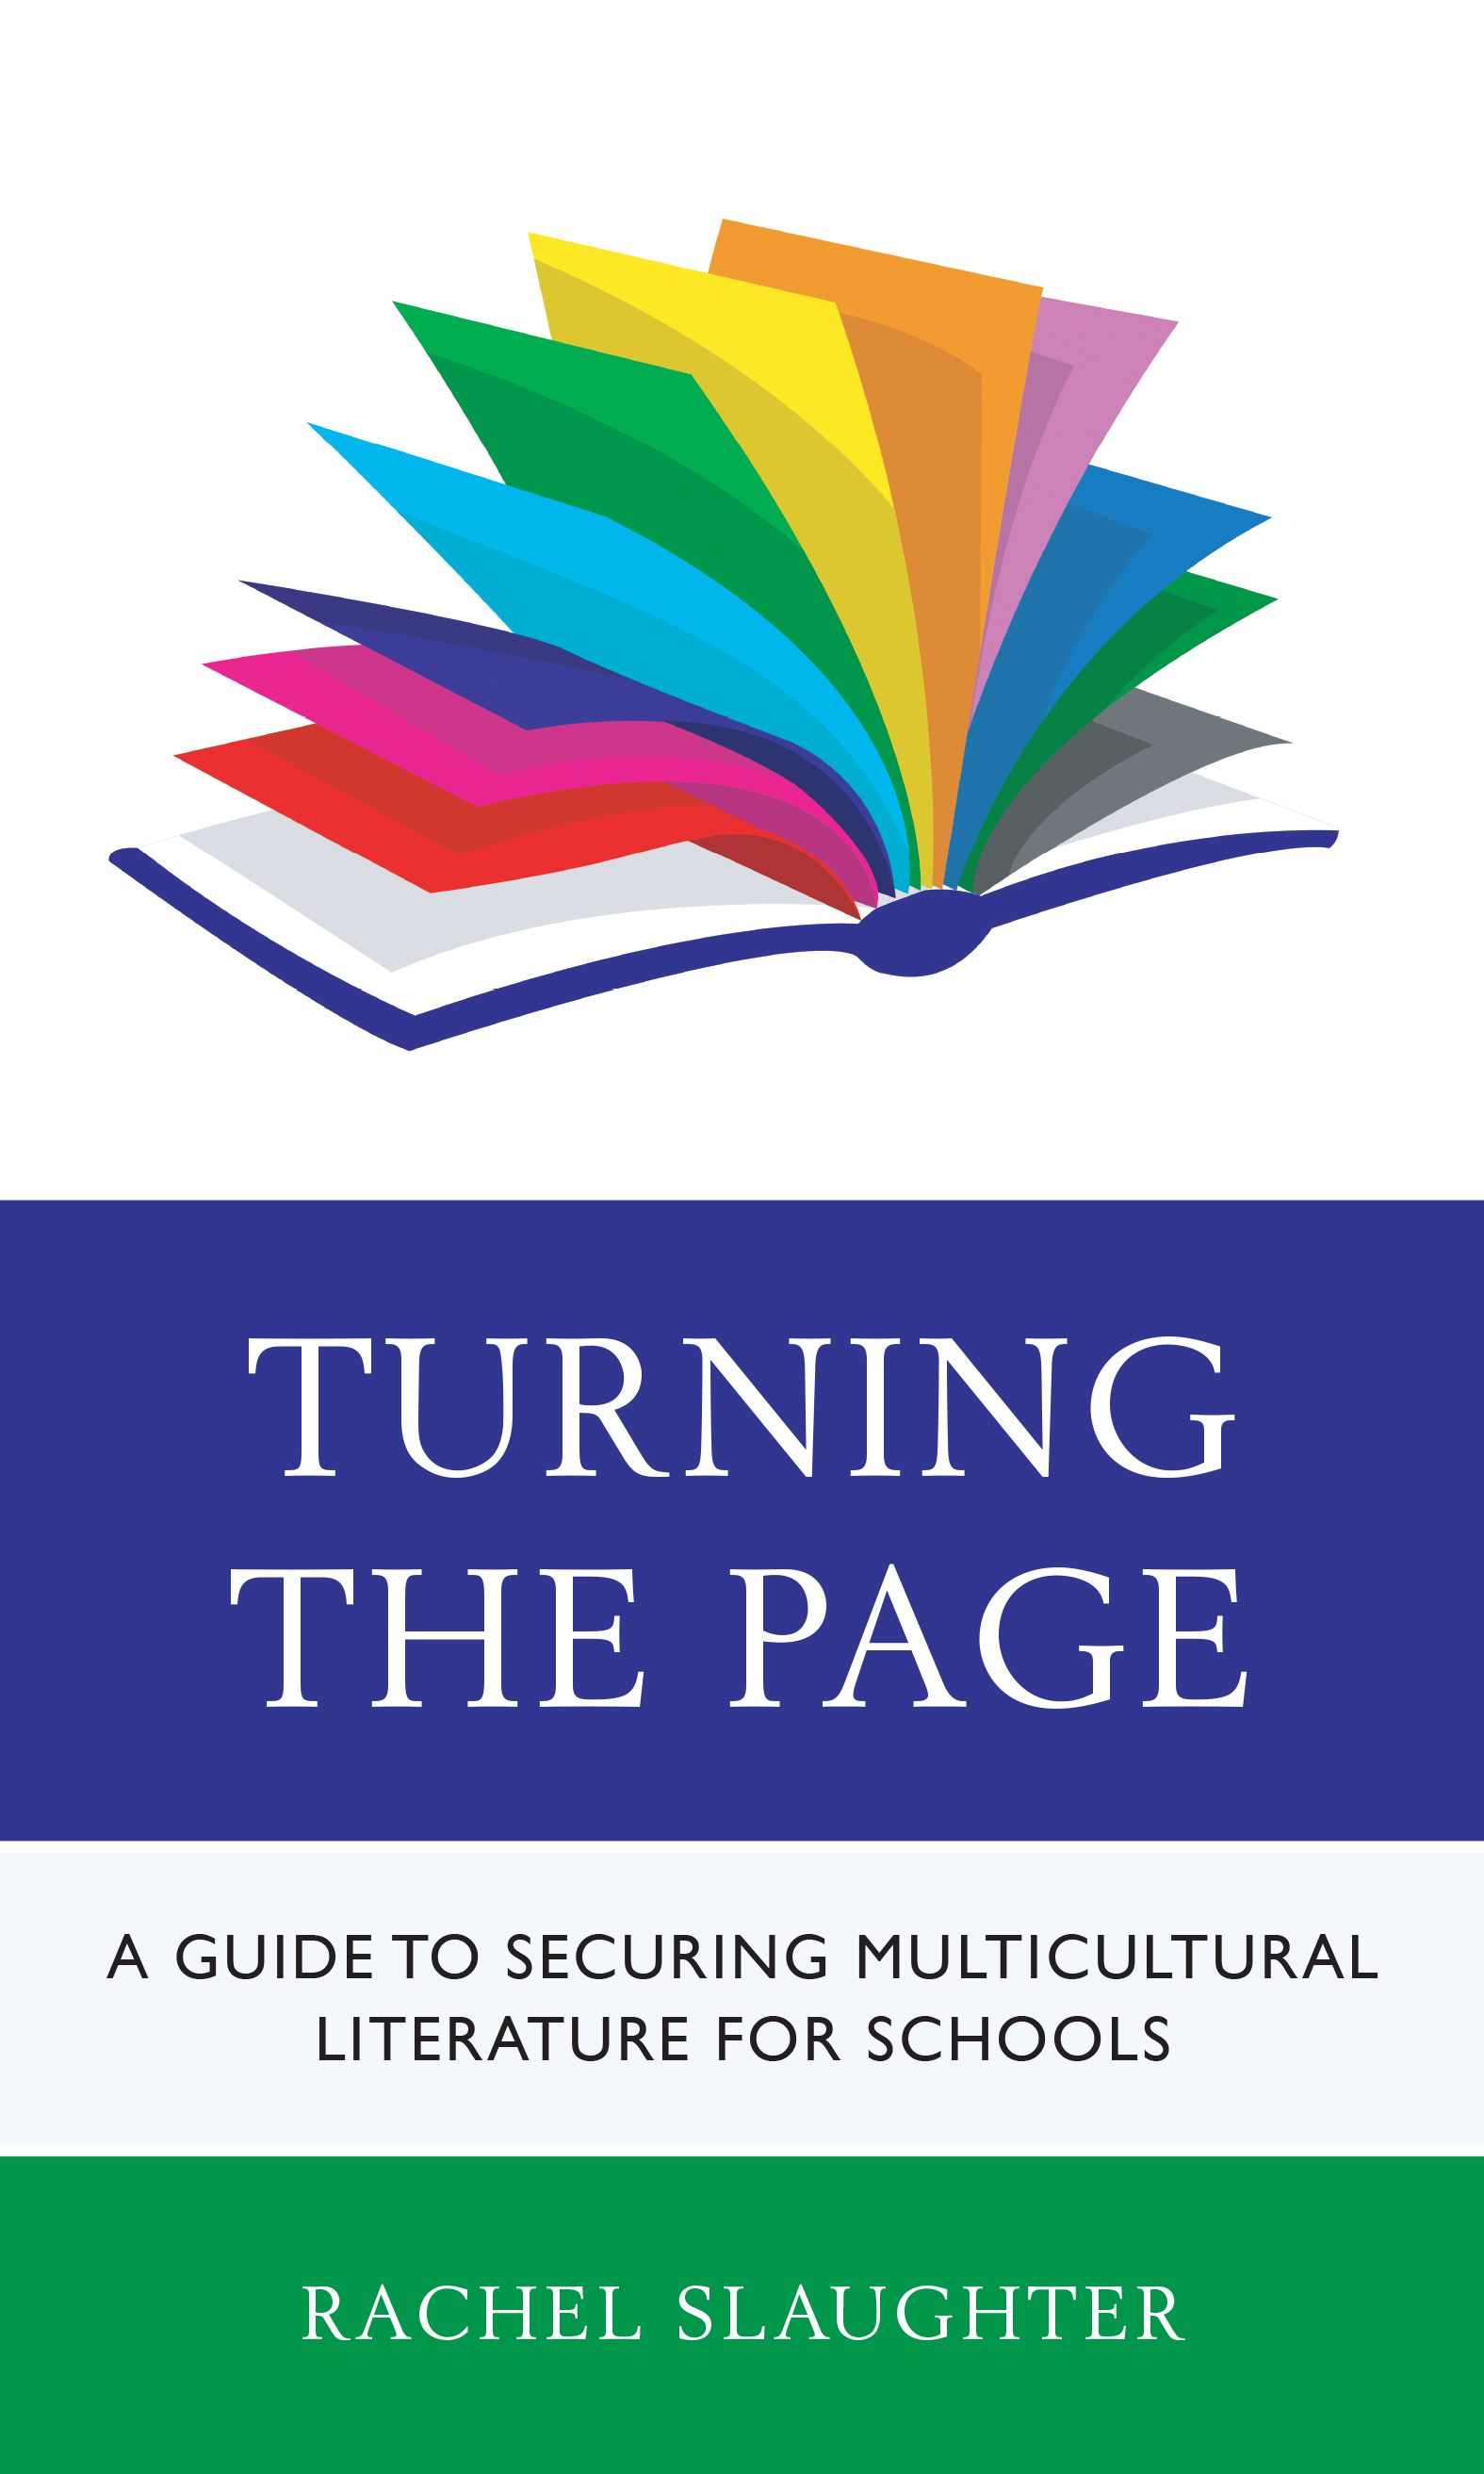 Turning the Page: A Guide to Securing Multicultural Literature for Schools